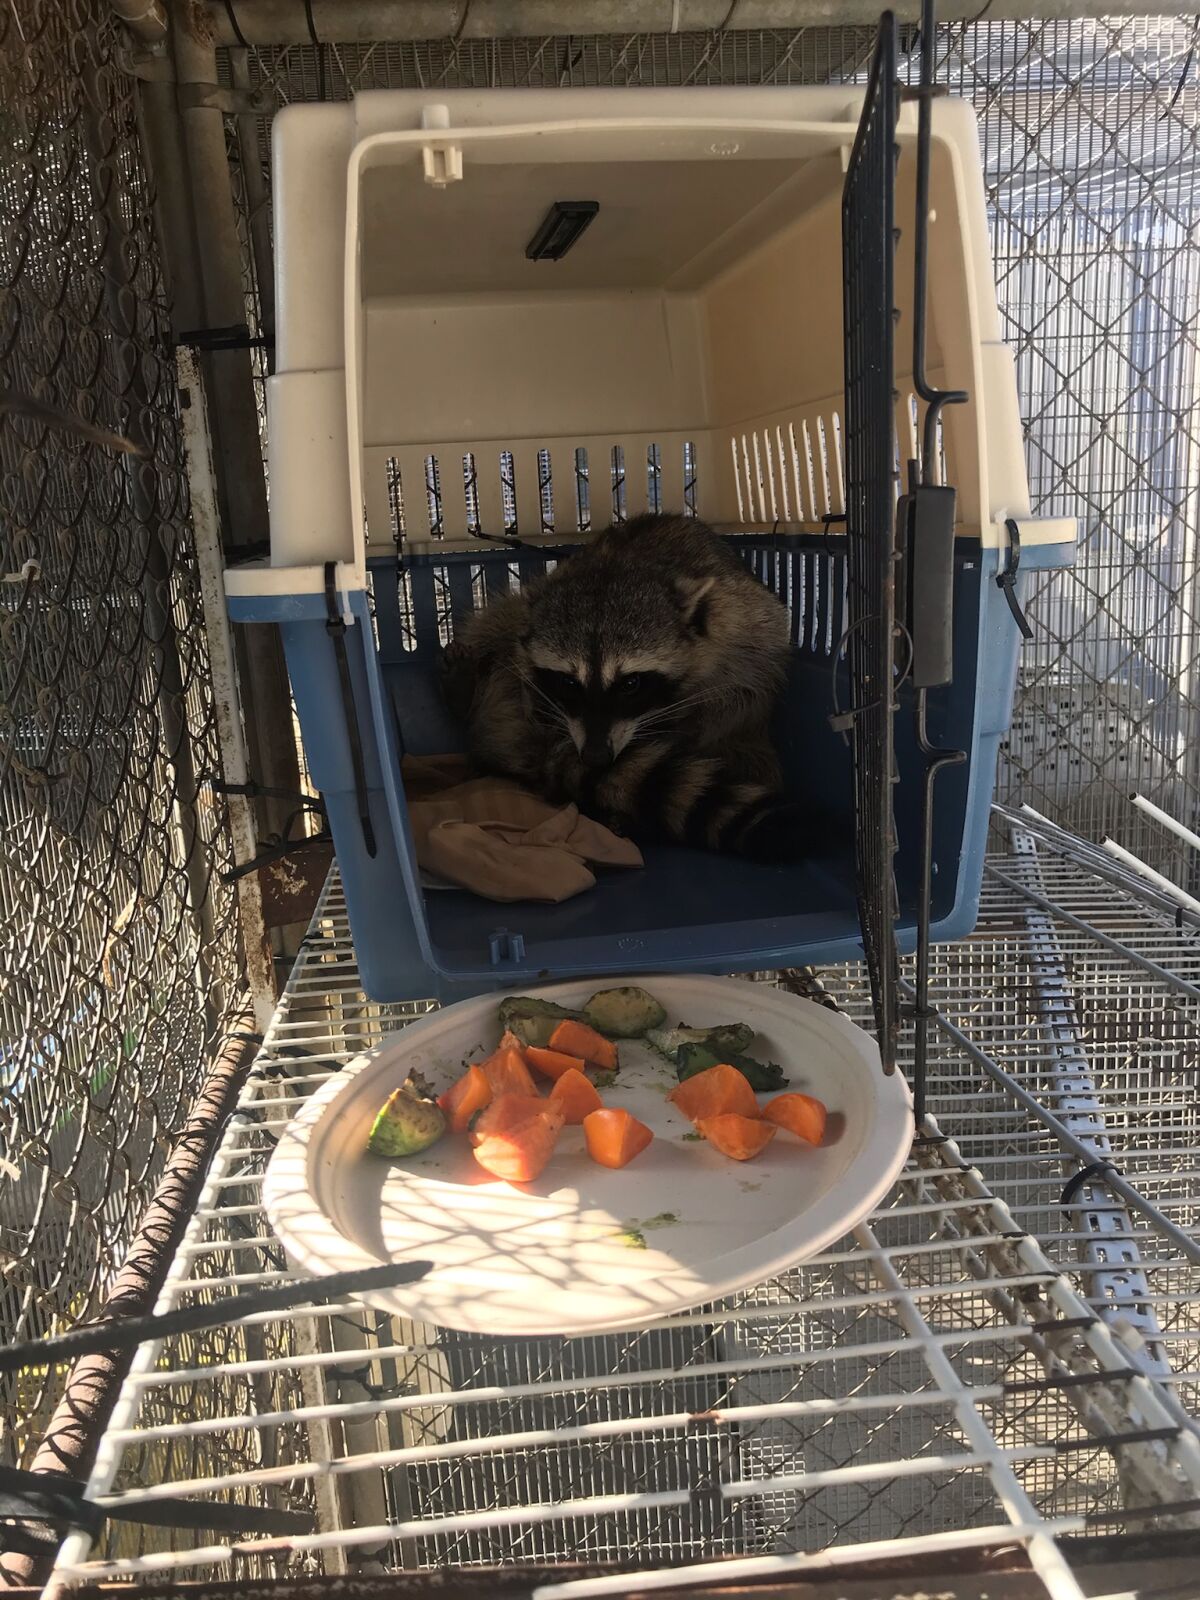 Burnie the raccoon enjoyed one last favorite snack: avocados and persimmons.